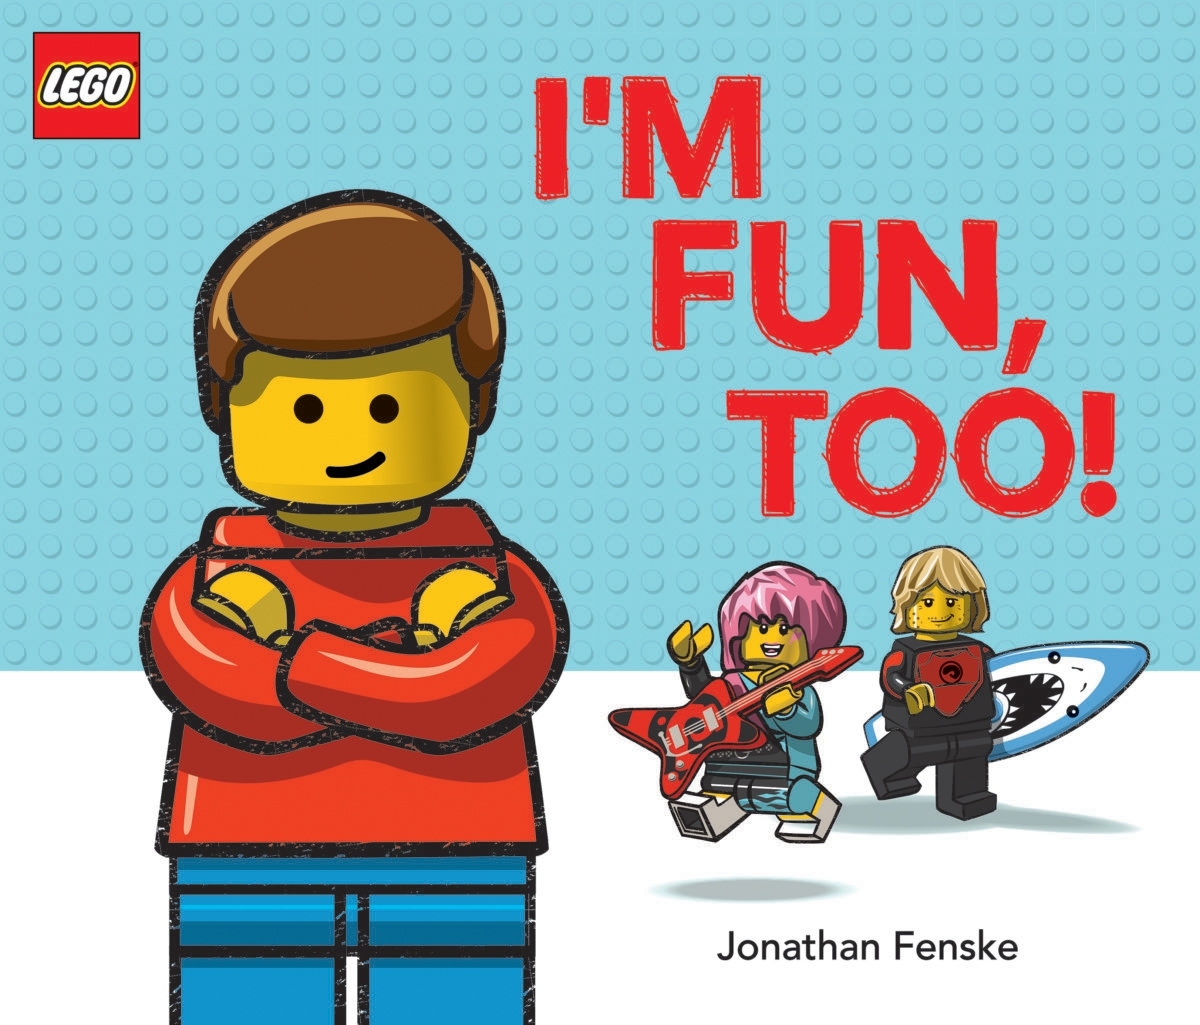 Book:　LEGO®　I'm　online　Buy　LEGO®　Too!　Official　5005607　Other　Picture　the　Shop　Fun,　at　US